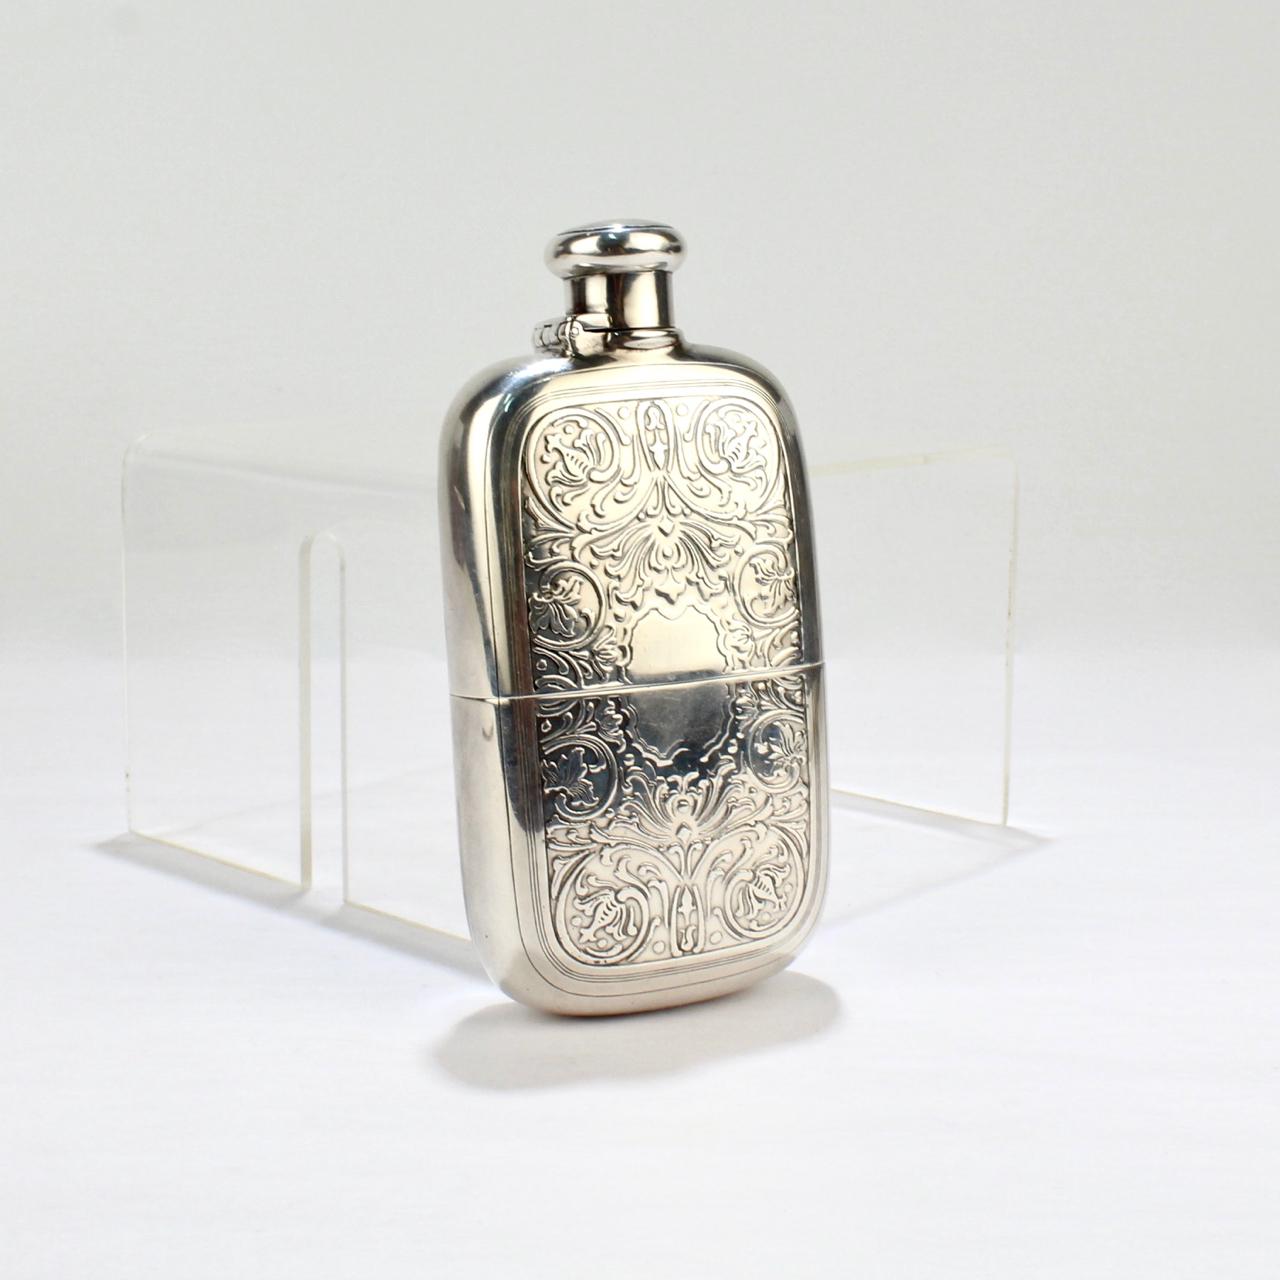 Vintage Art Deco Silver Hip Flask D3 8oz Stainless Steel Drinking Whiskey Retro 